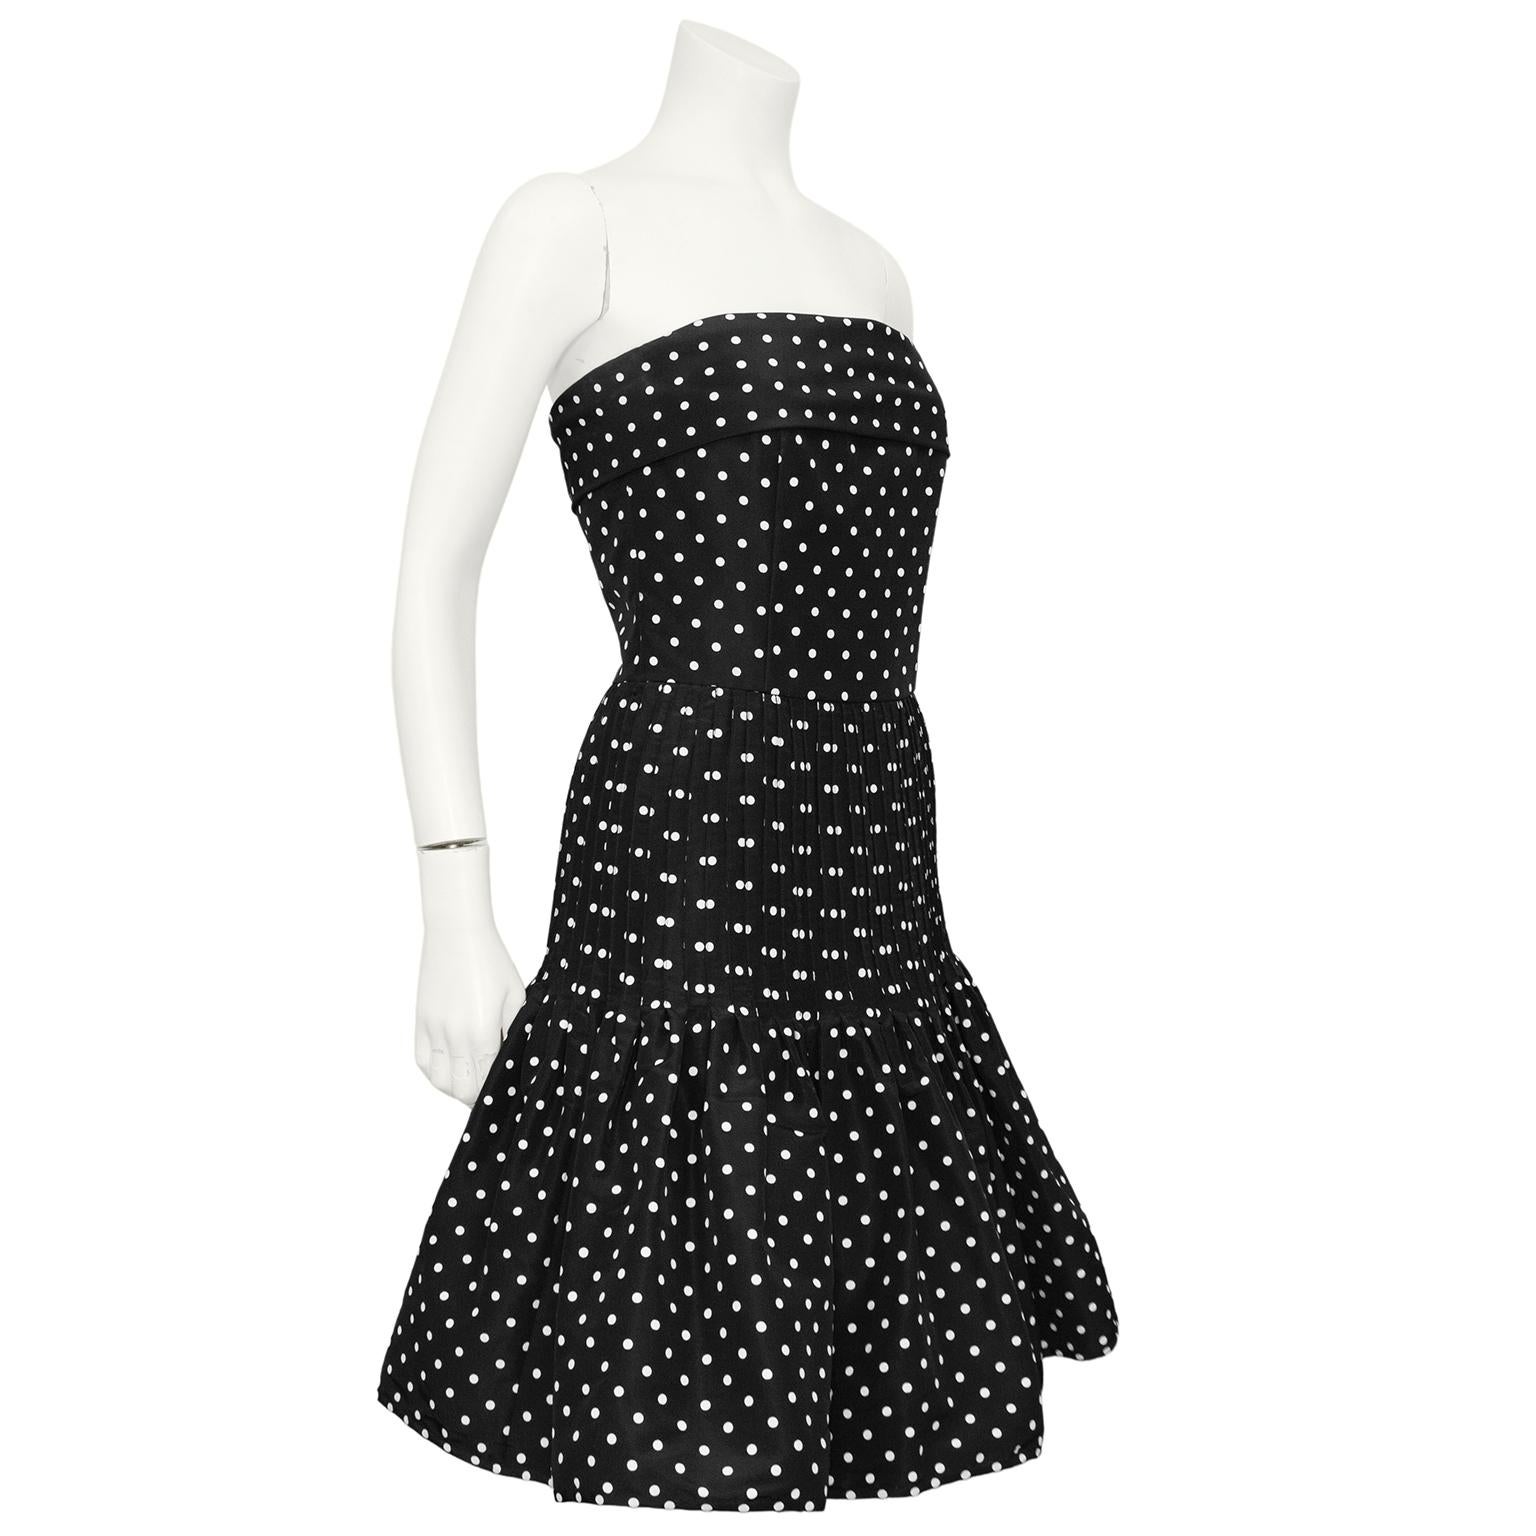 Fun and flirty 1980s Valentino black and white polka dotted strapless cocktail dress. the Top of the dress has a wide folded panel, is nipped in at the waist and the skirt is fitted through the hips with a pintuck detail. The interior is constructed